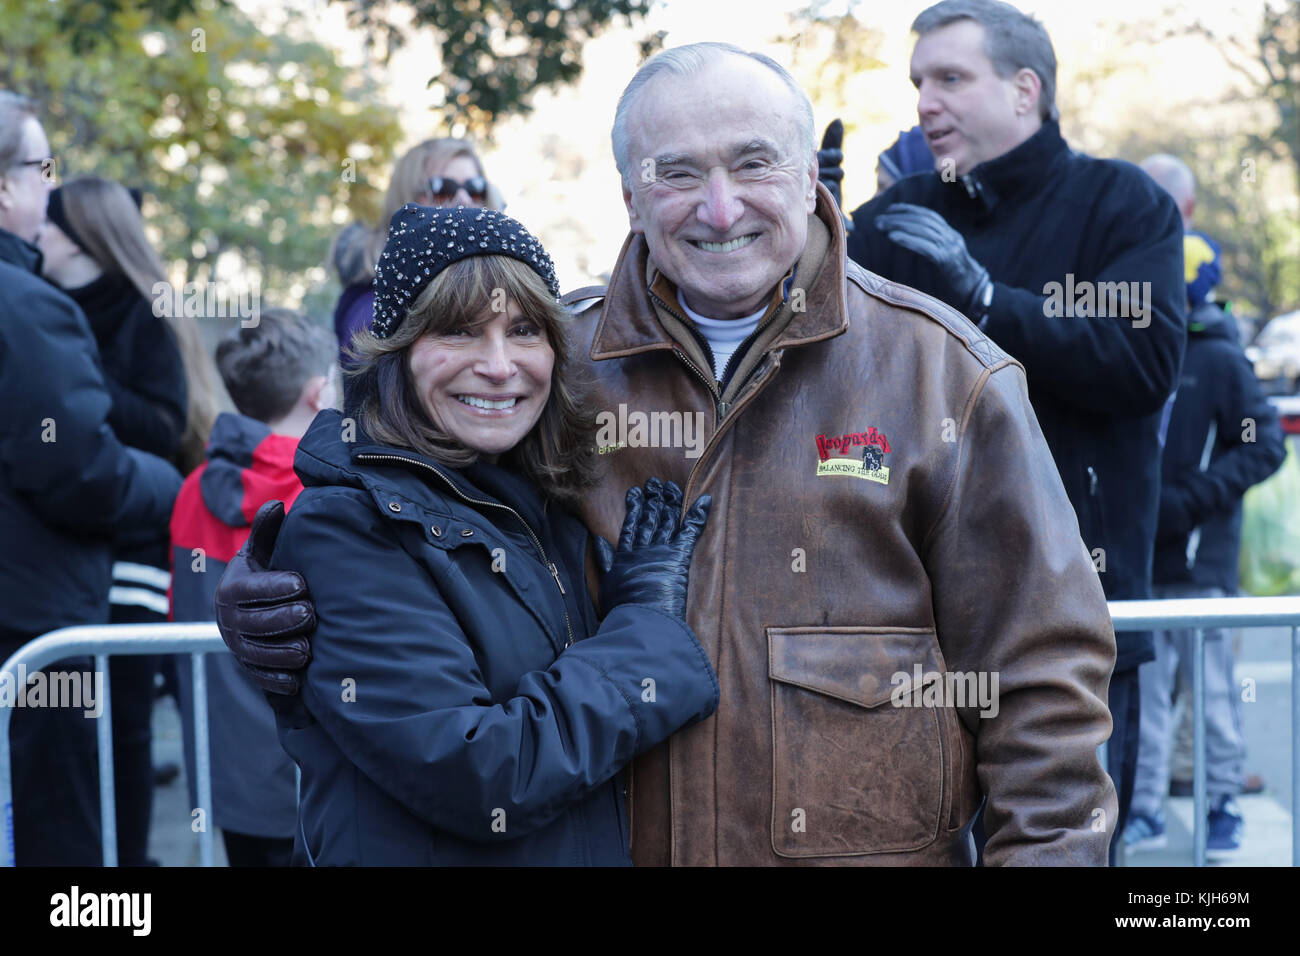 November 23, 2017 - New York, NY, USA - Central Park West, New York, USA, November 23 2017 - Ex-Police Commissioner William Bratton attends the 91st Annual Macy's Thanksgiving Day Parade today in New York City..Photo: Luiz Rampelotto/EuropaNewswire (Credit Image: © Luiz Rampelotto via ZUMA Wire) Stock Photo